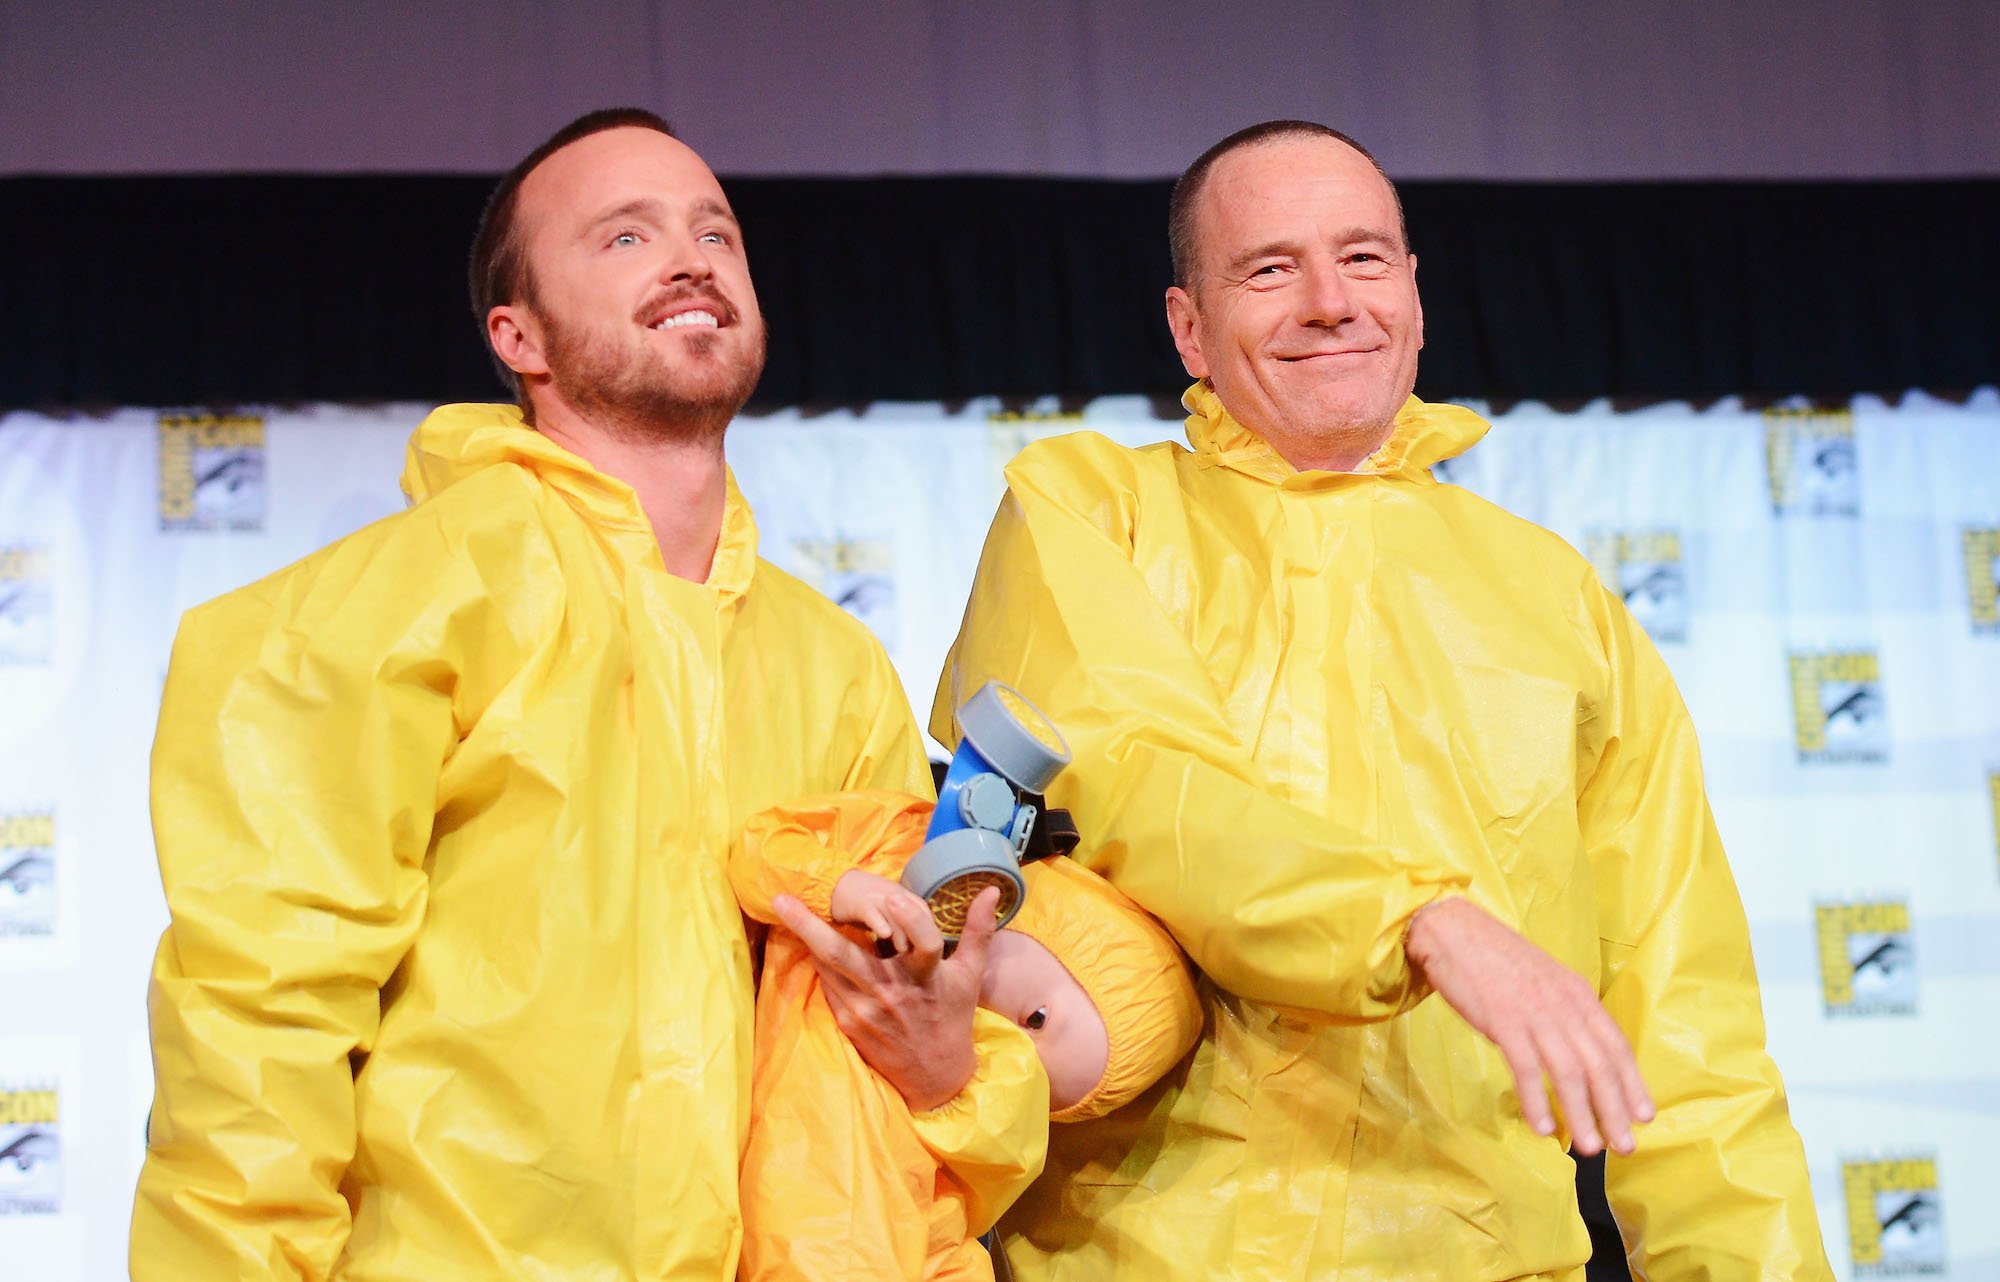 (L-R) Aaron Paul and Bryan Cranston smiling in yellow suits